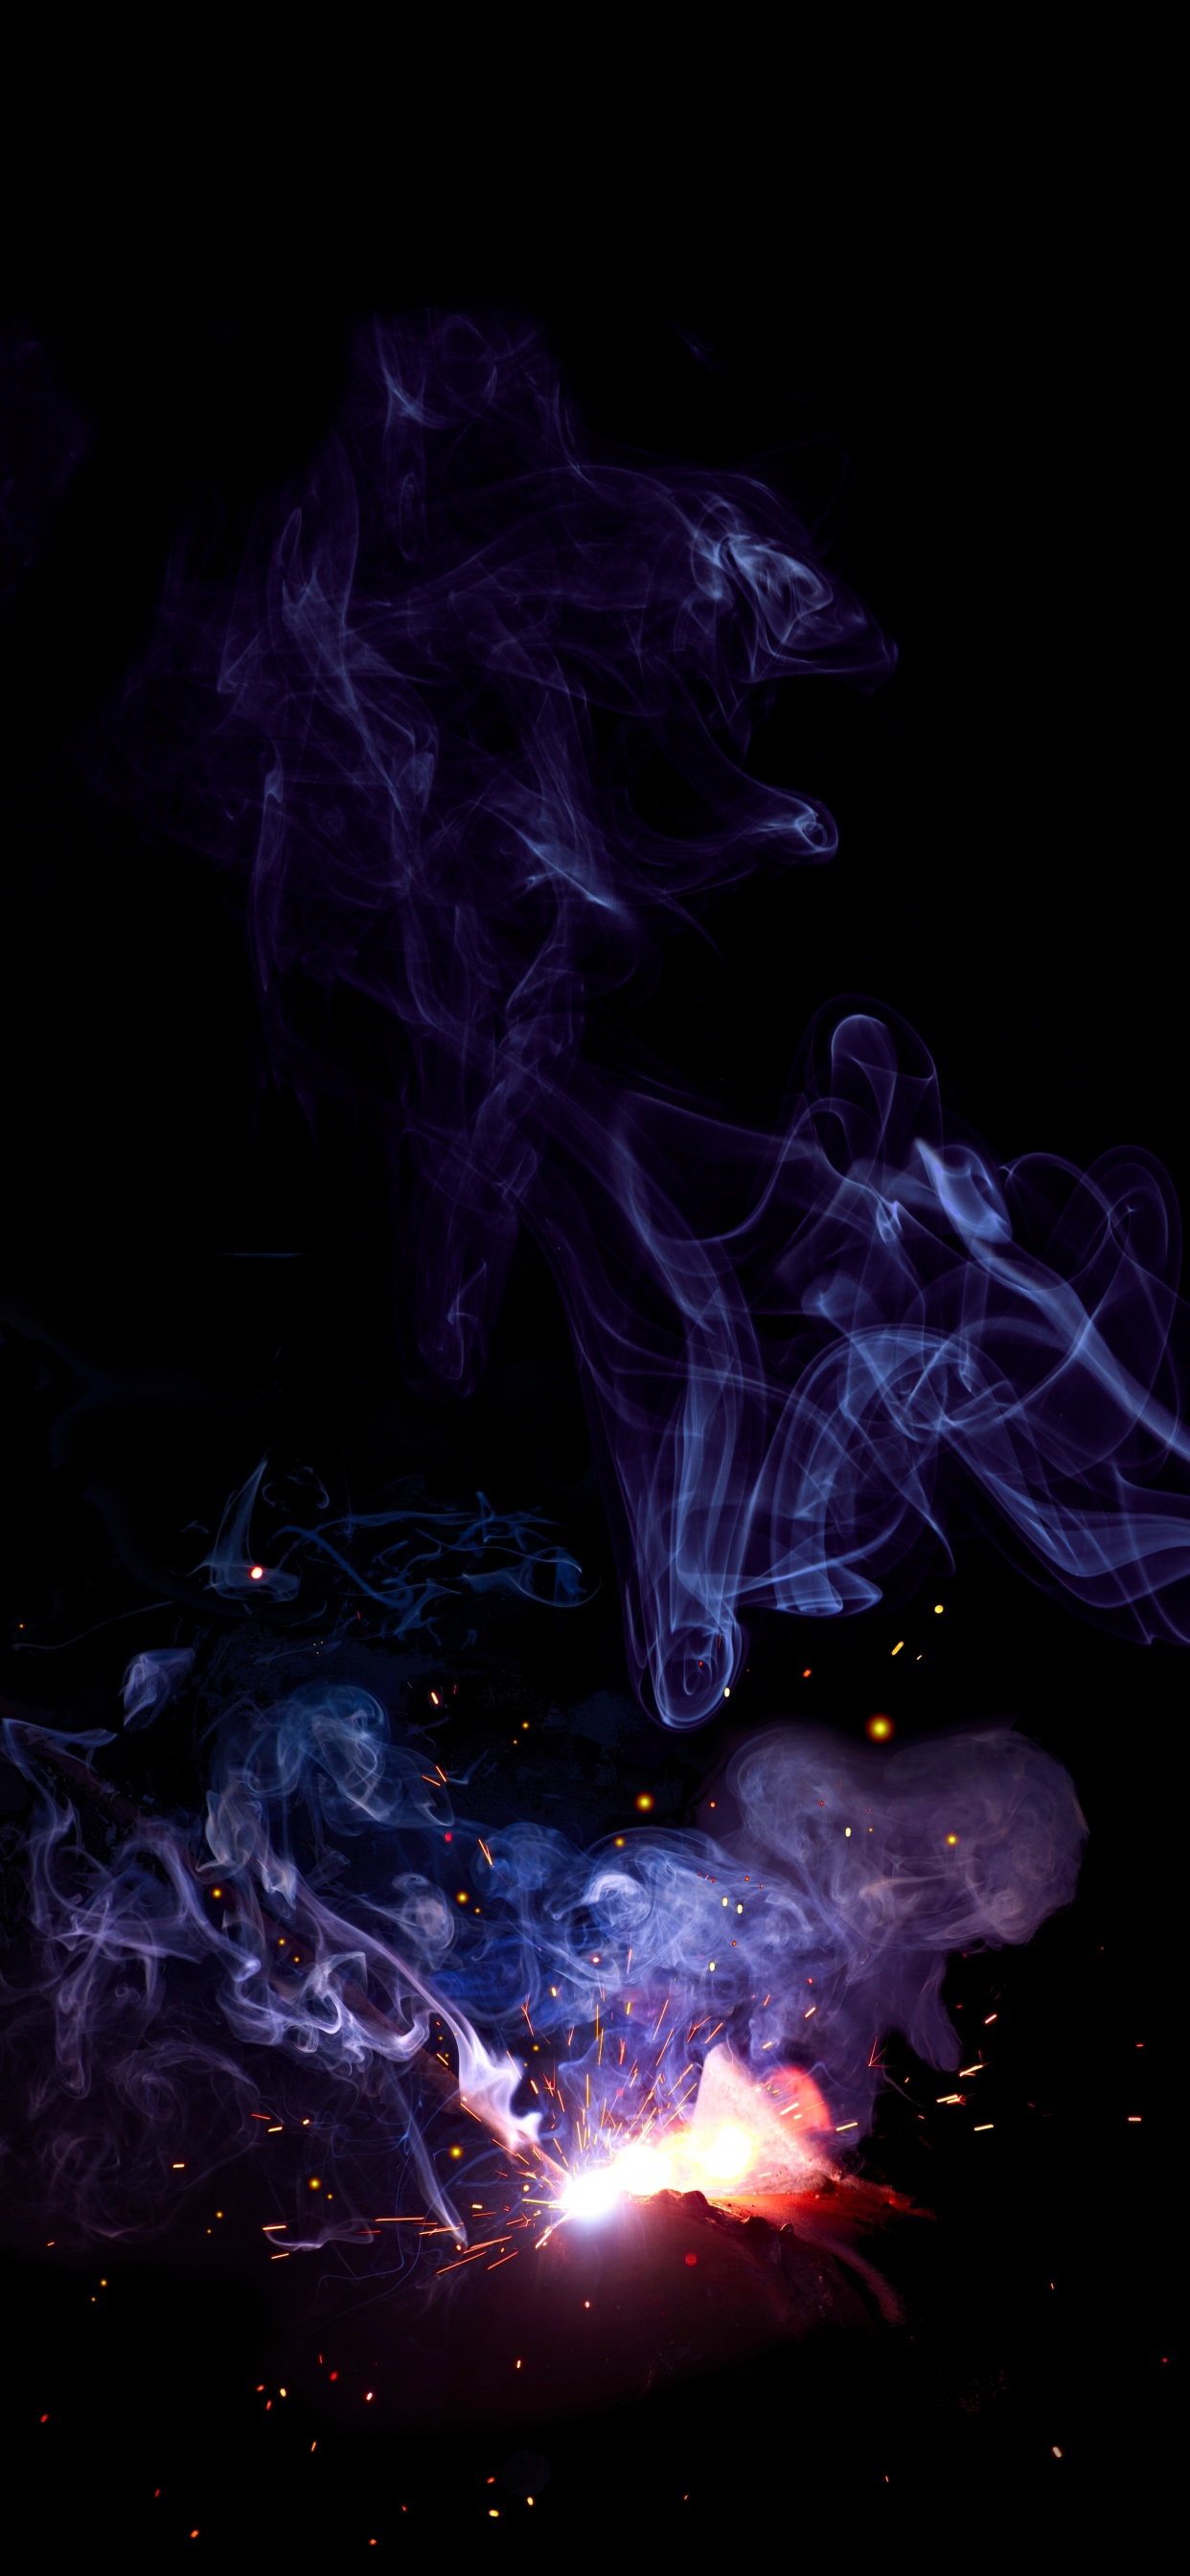 Blue and White Smoke Illustration. Wallpaper in 1242x2688 Resolution